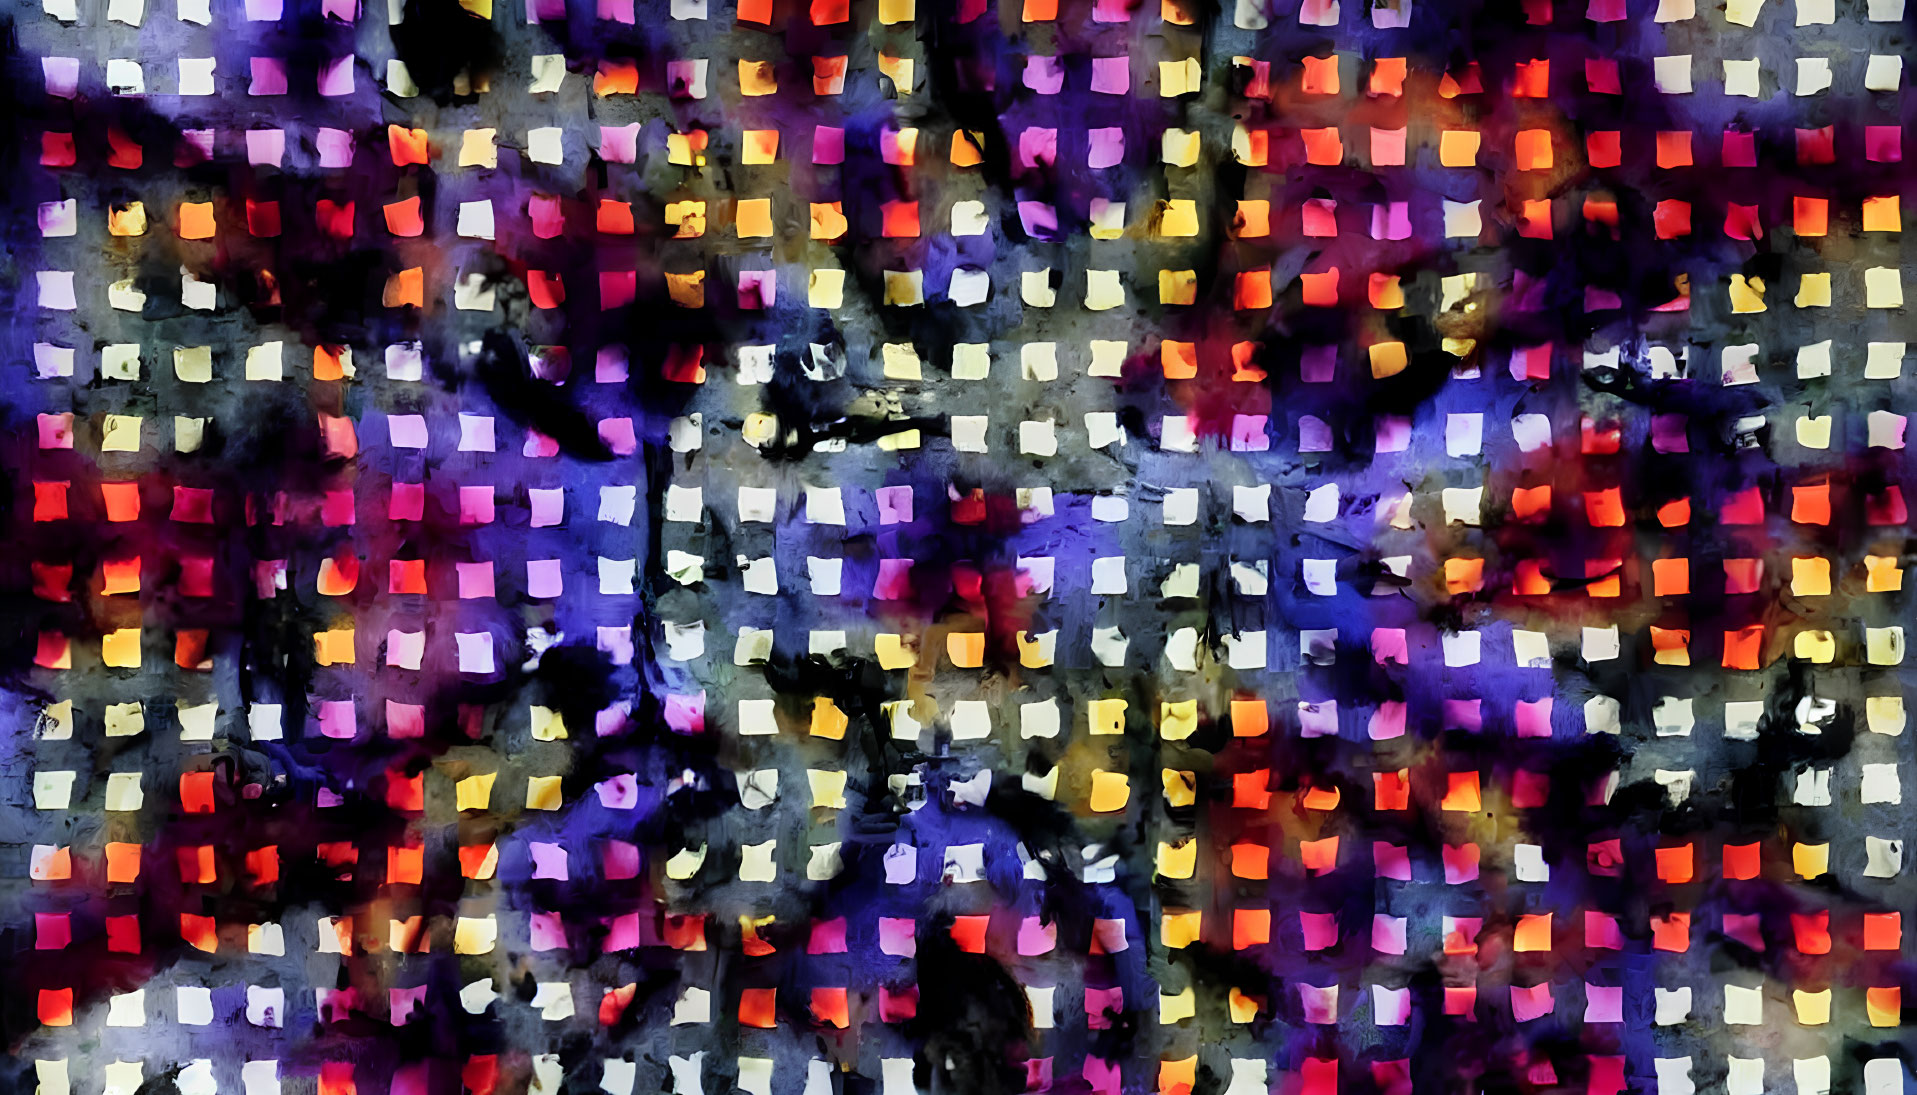 Colorful Pixelated Abstract Pattern in Purples, Reds, Yellows, and Grayish